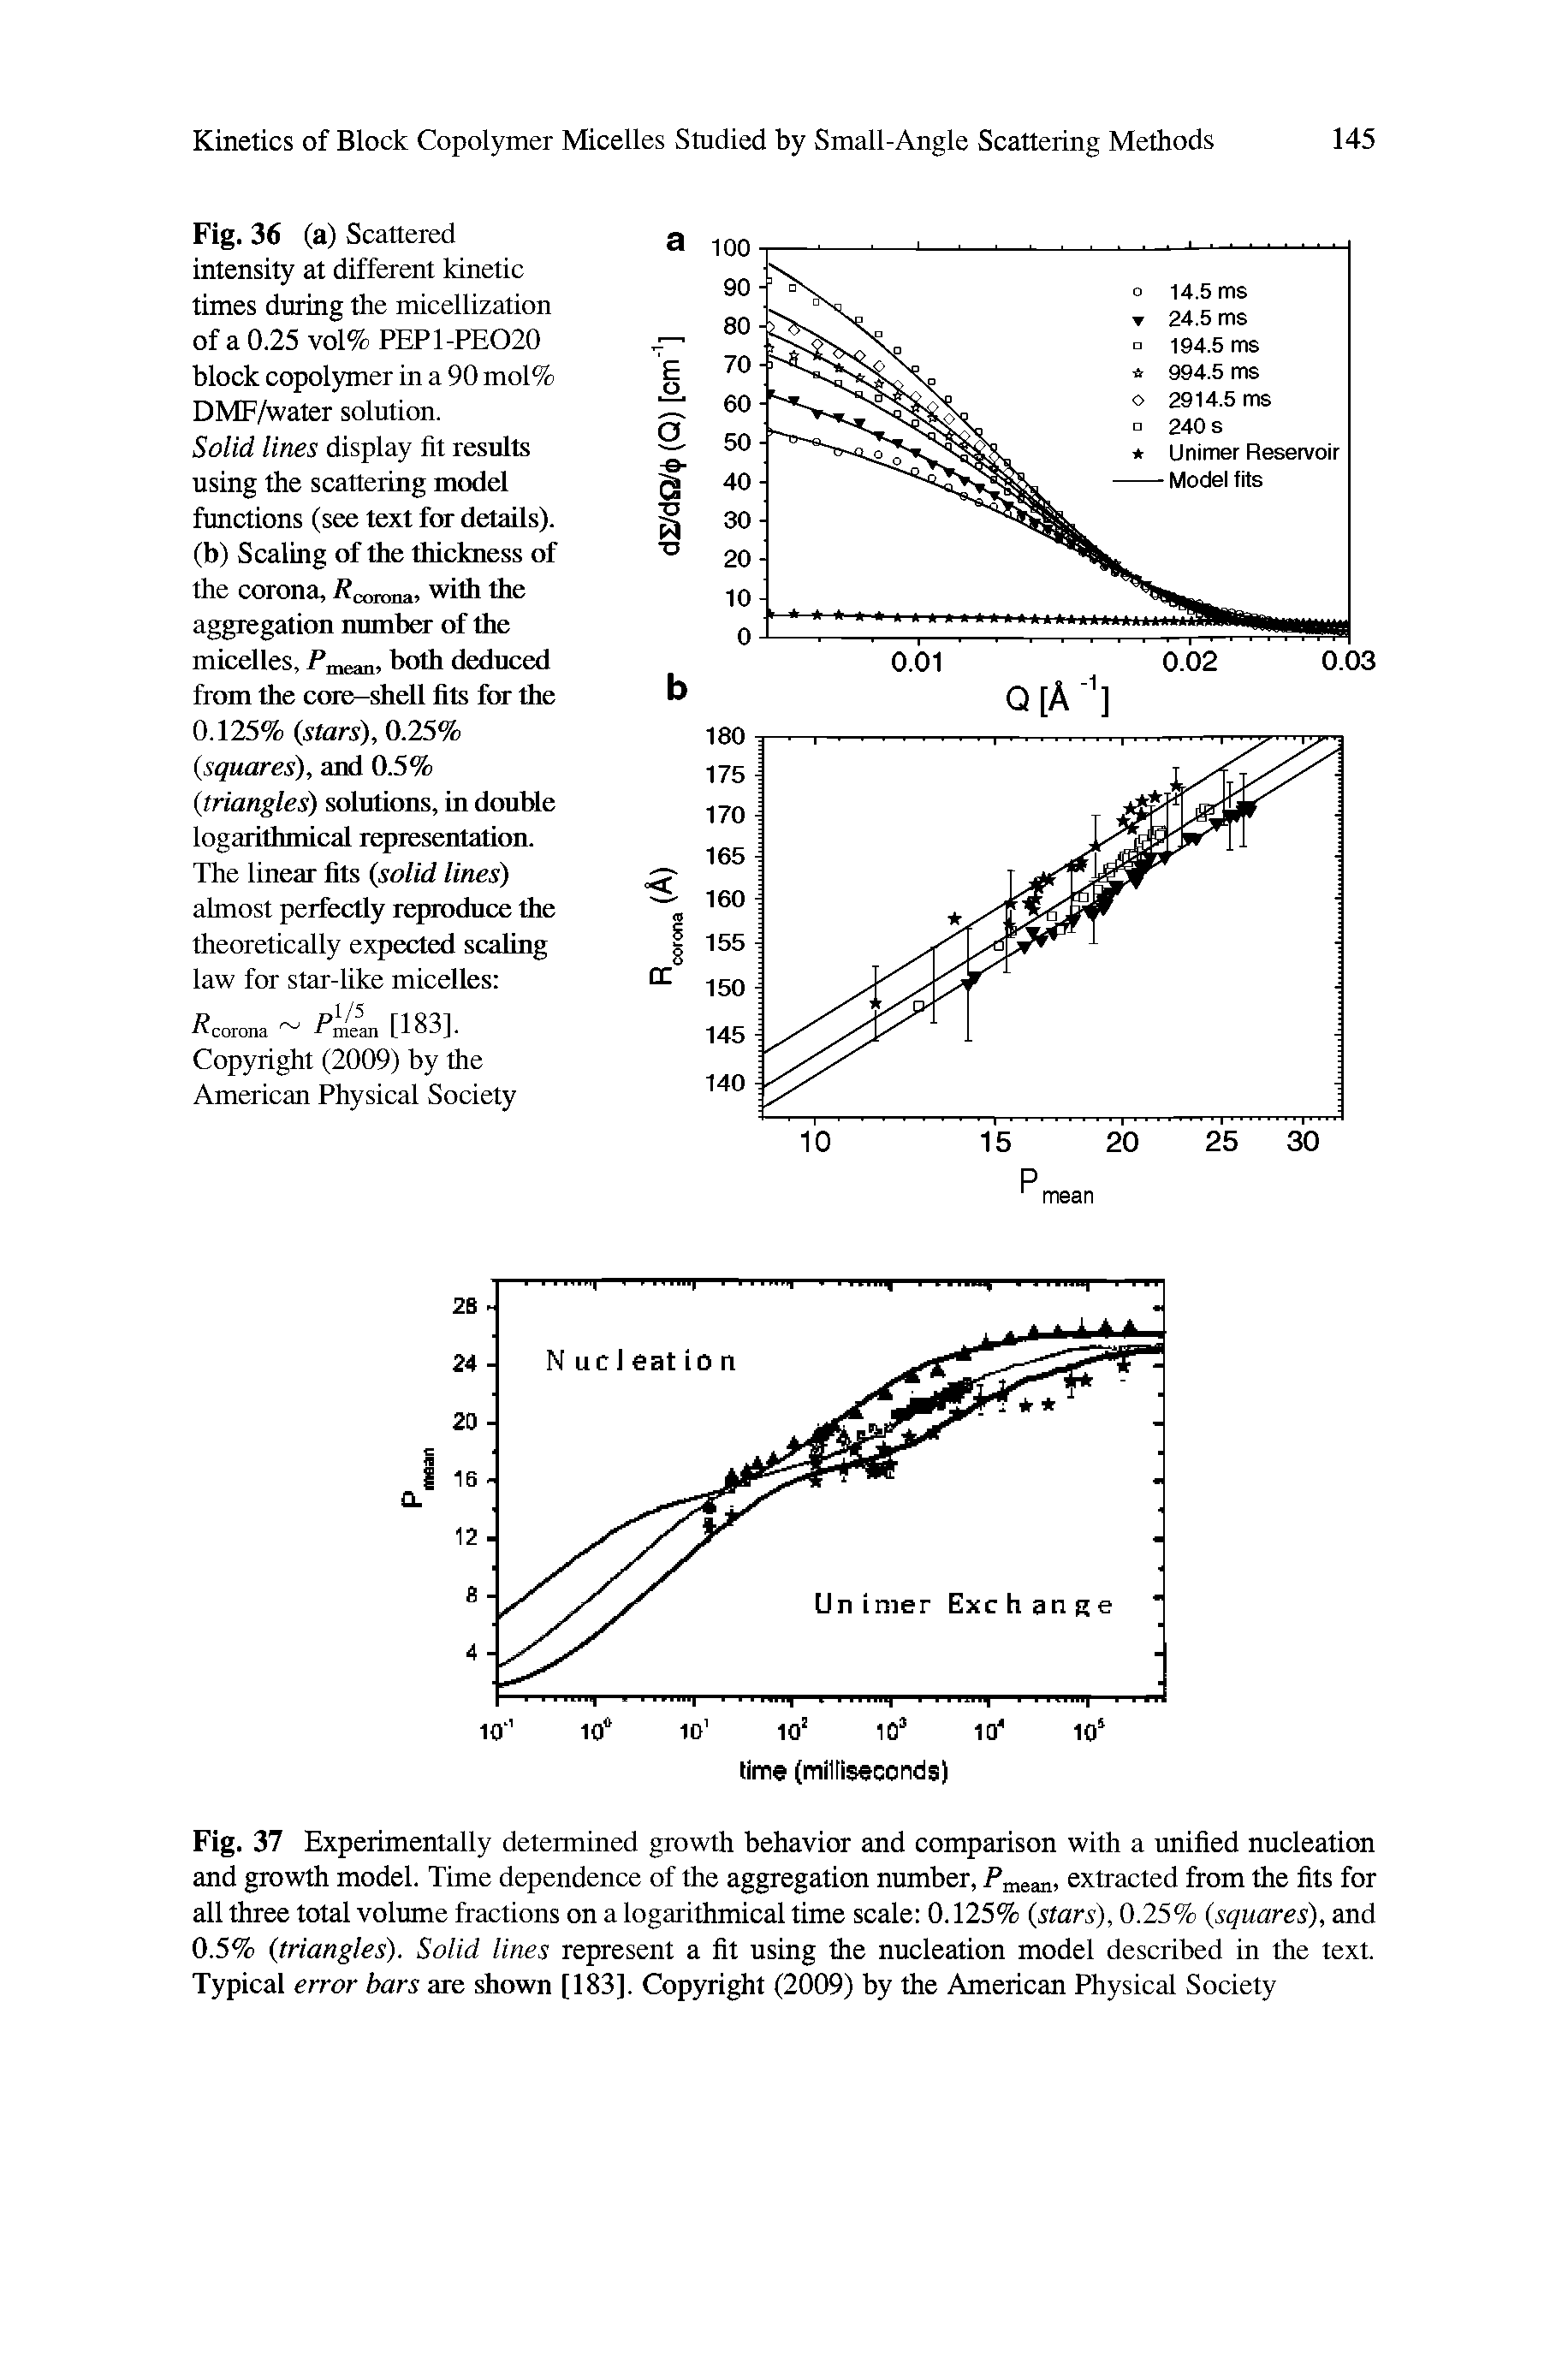 Fig. 37 Experimentally determined growth behavior and comparison with a unified nucleation and growth model. Time dependence of the aggregation number, Pmeam extracted from the fits for all three total volume fractions on a logarithmical time scale 0.125% (stars), 0.25% (squares), and 0.5% (triangles). Solid lines represent a fit using the nucleation model described in the text. Typical error bars are shown [183]. Copyright (2009) by the American Physical Society...